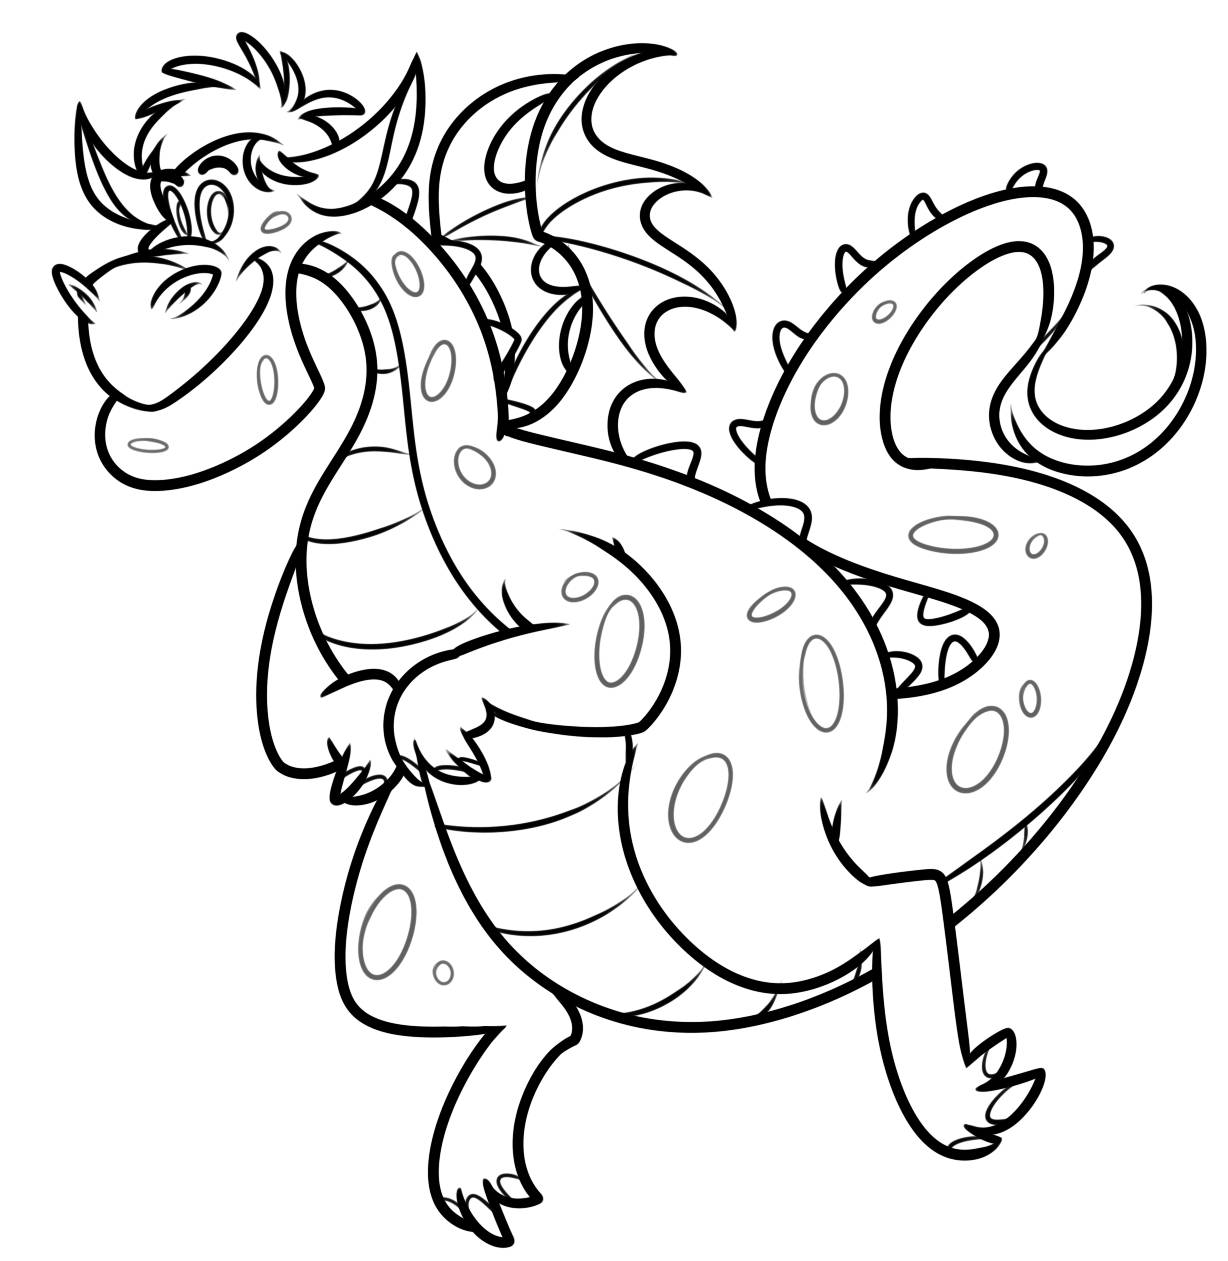 Pete and his dragon coloring page